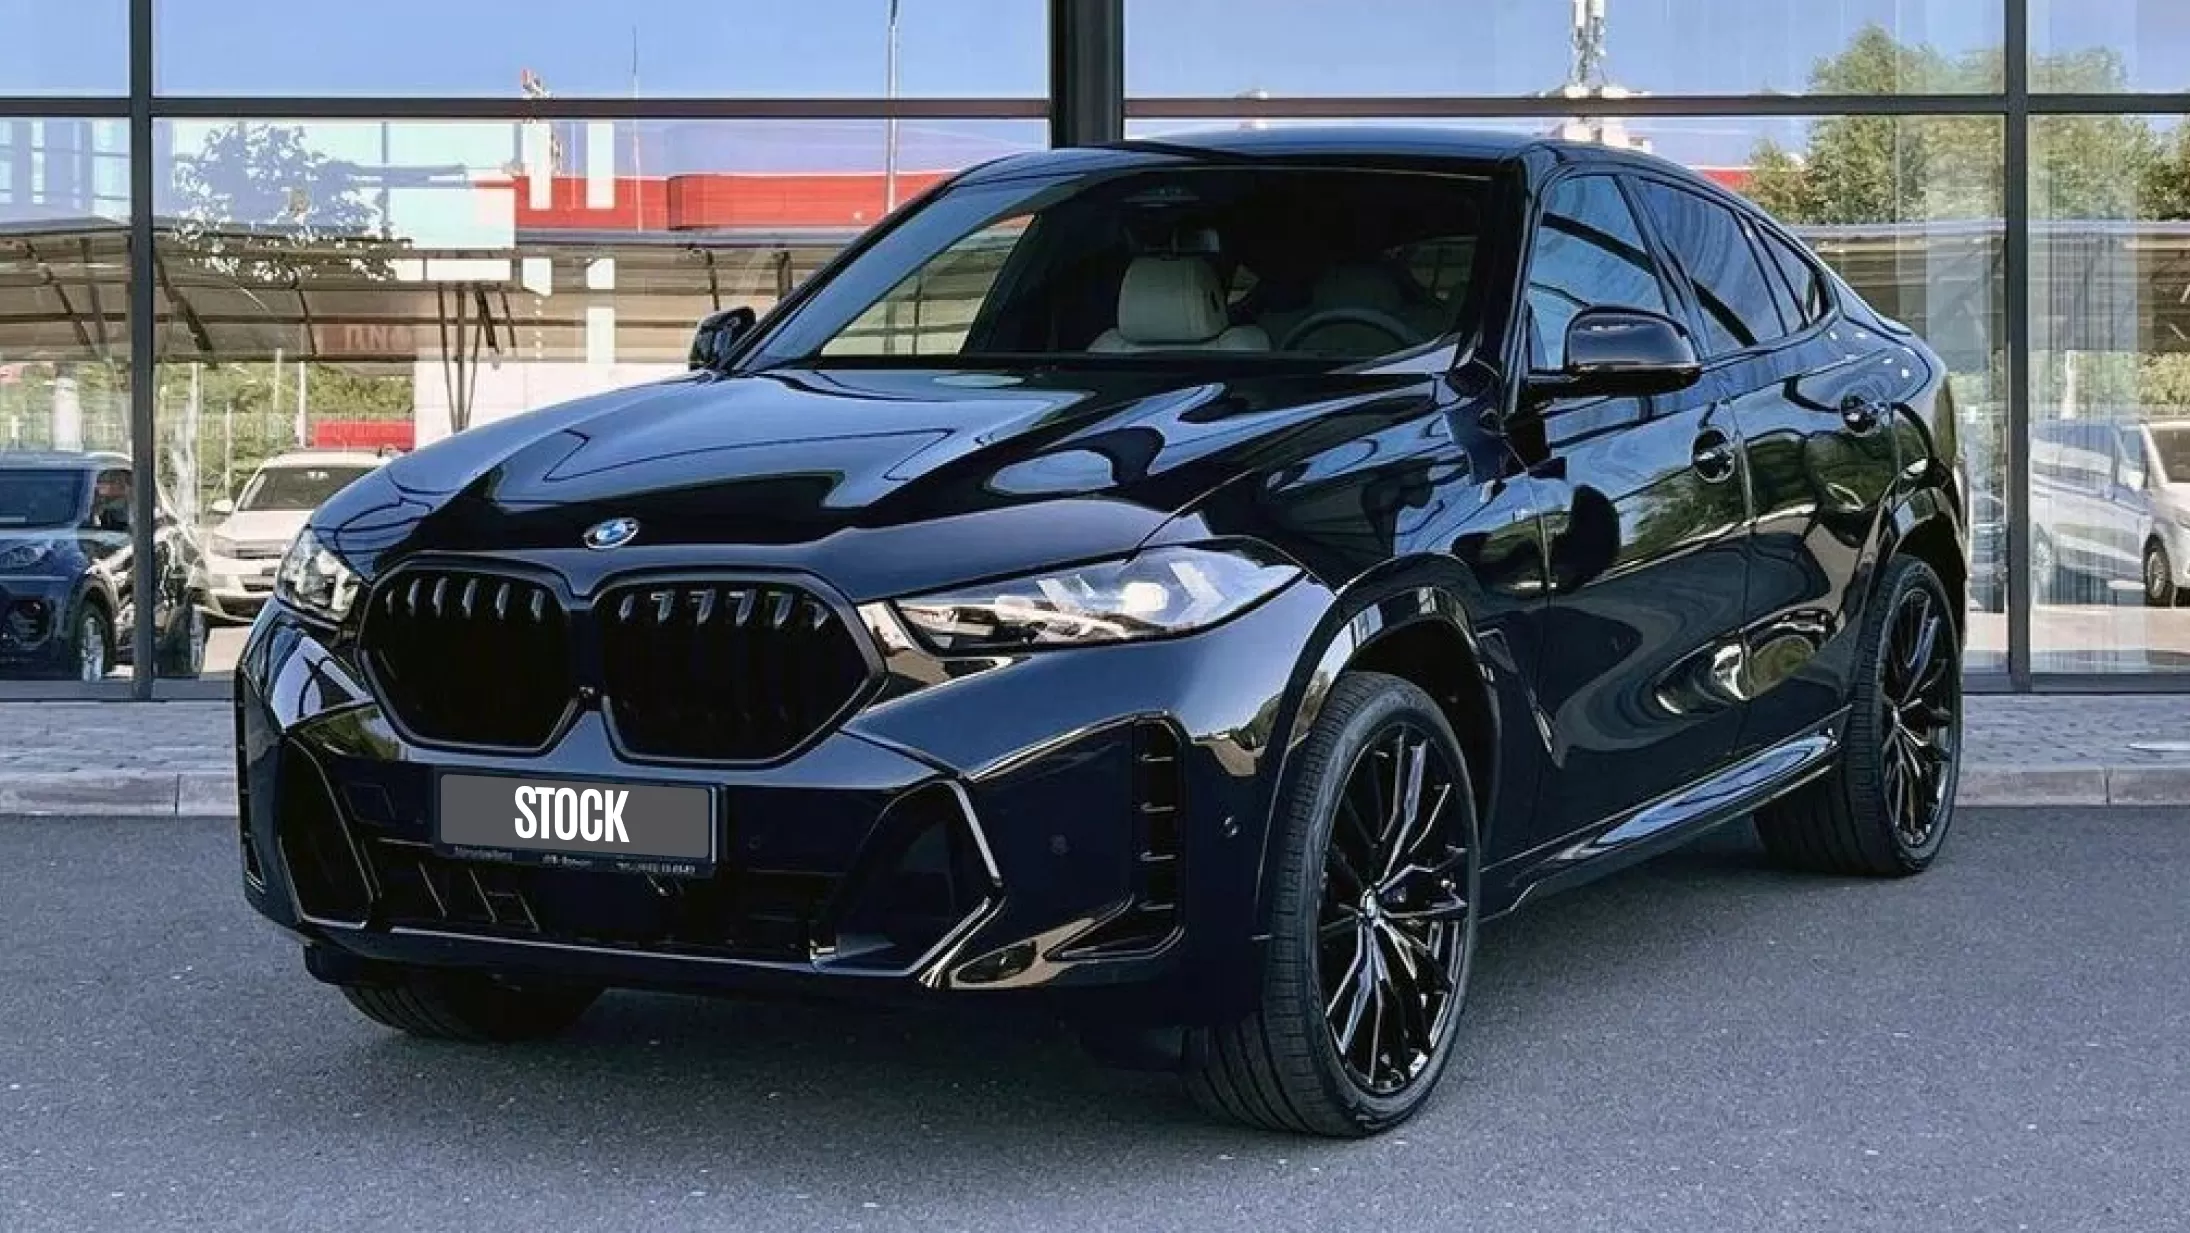 Front angle view on a BMW X6 LCI Facelift with a body kit giving the car a custom appearance